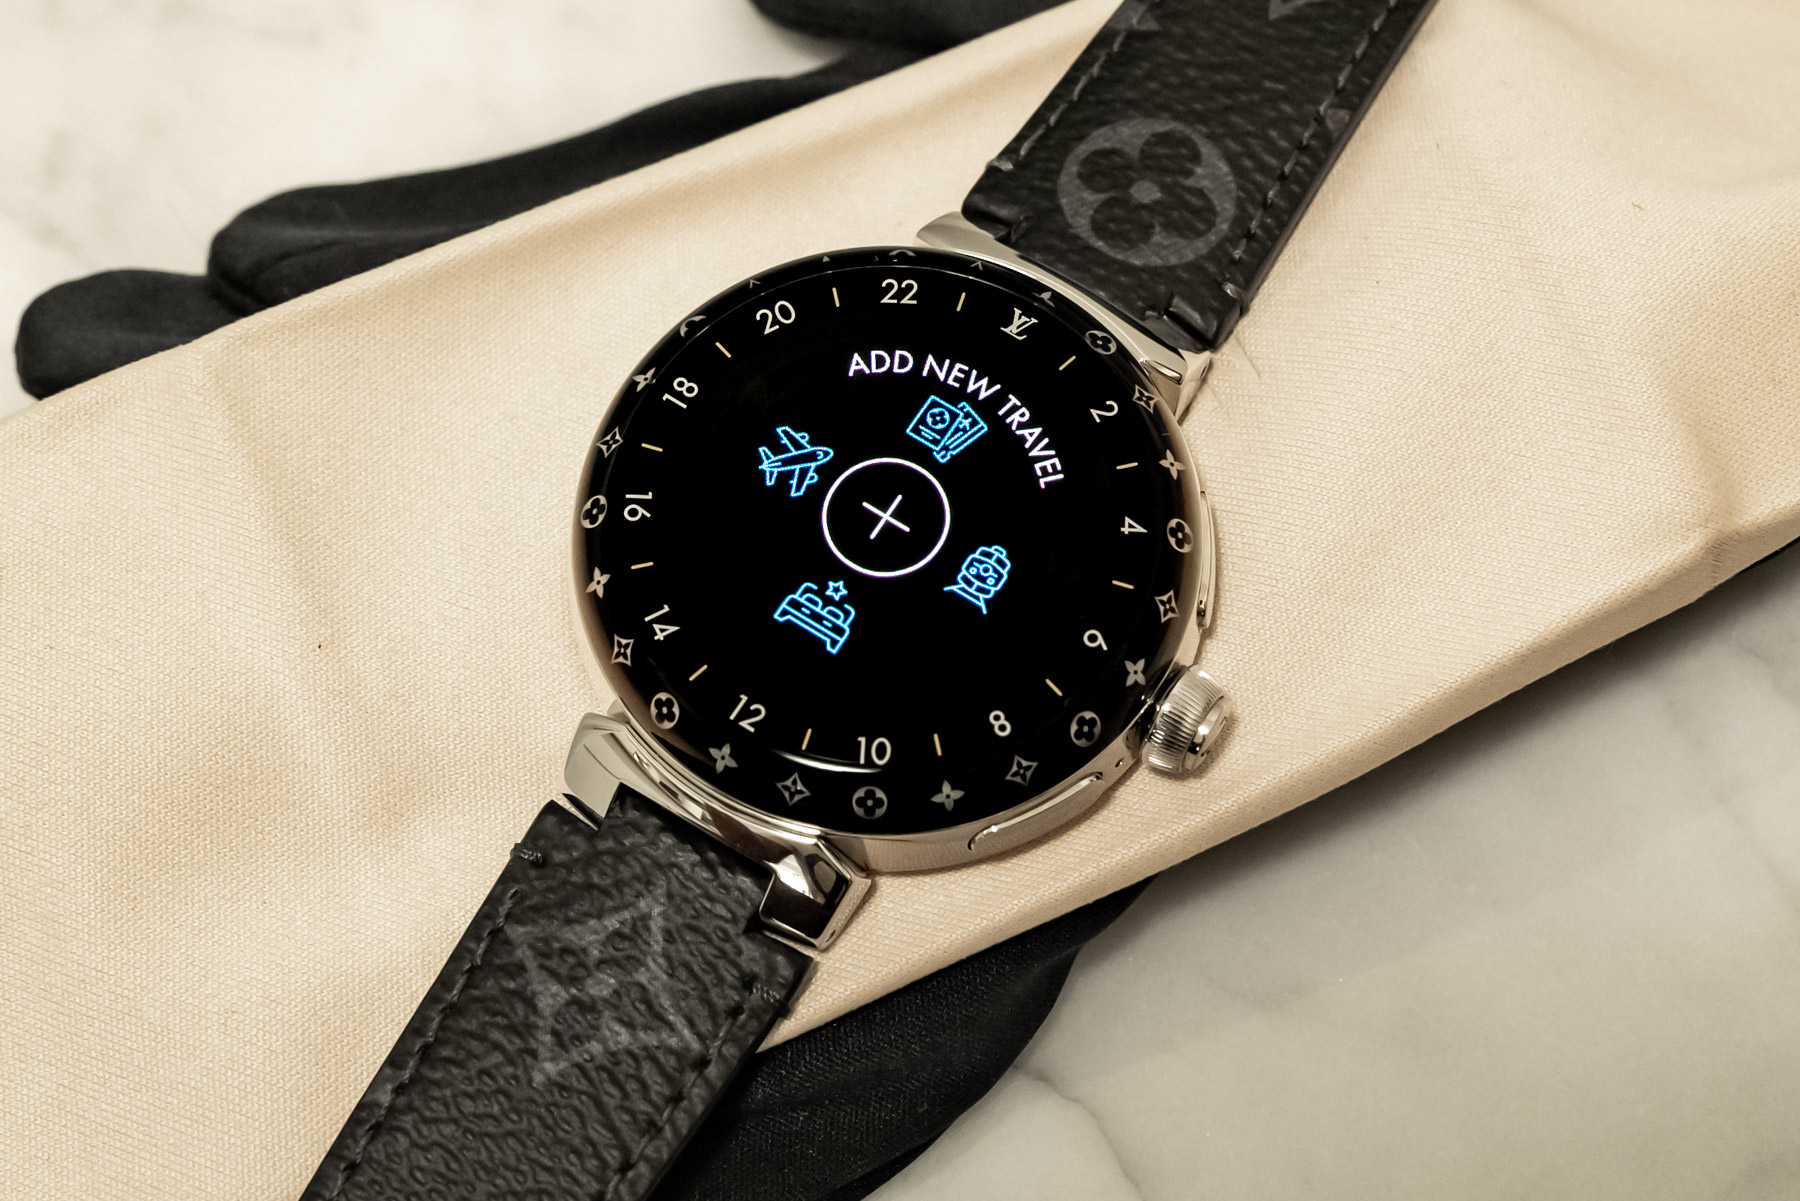 I love how extra Louis Vuitton's new $3,400 smartwatch is